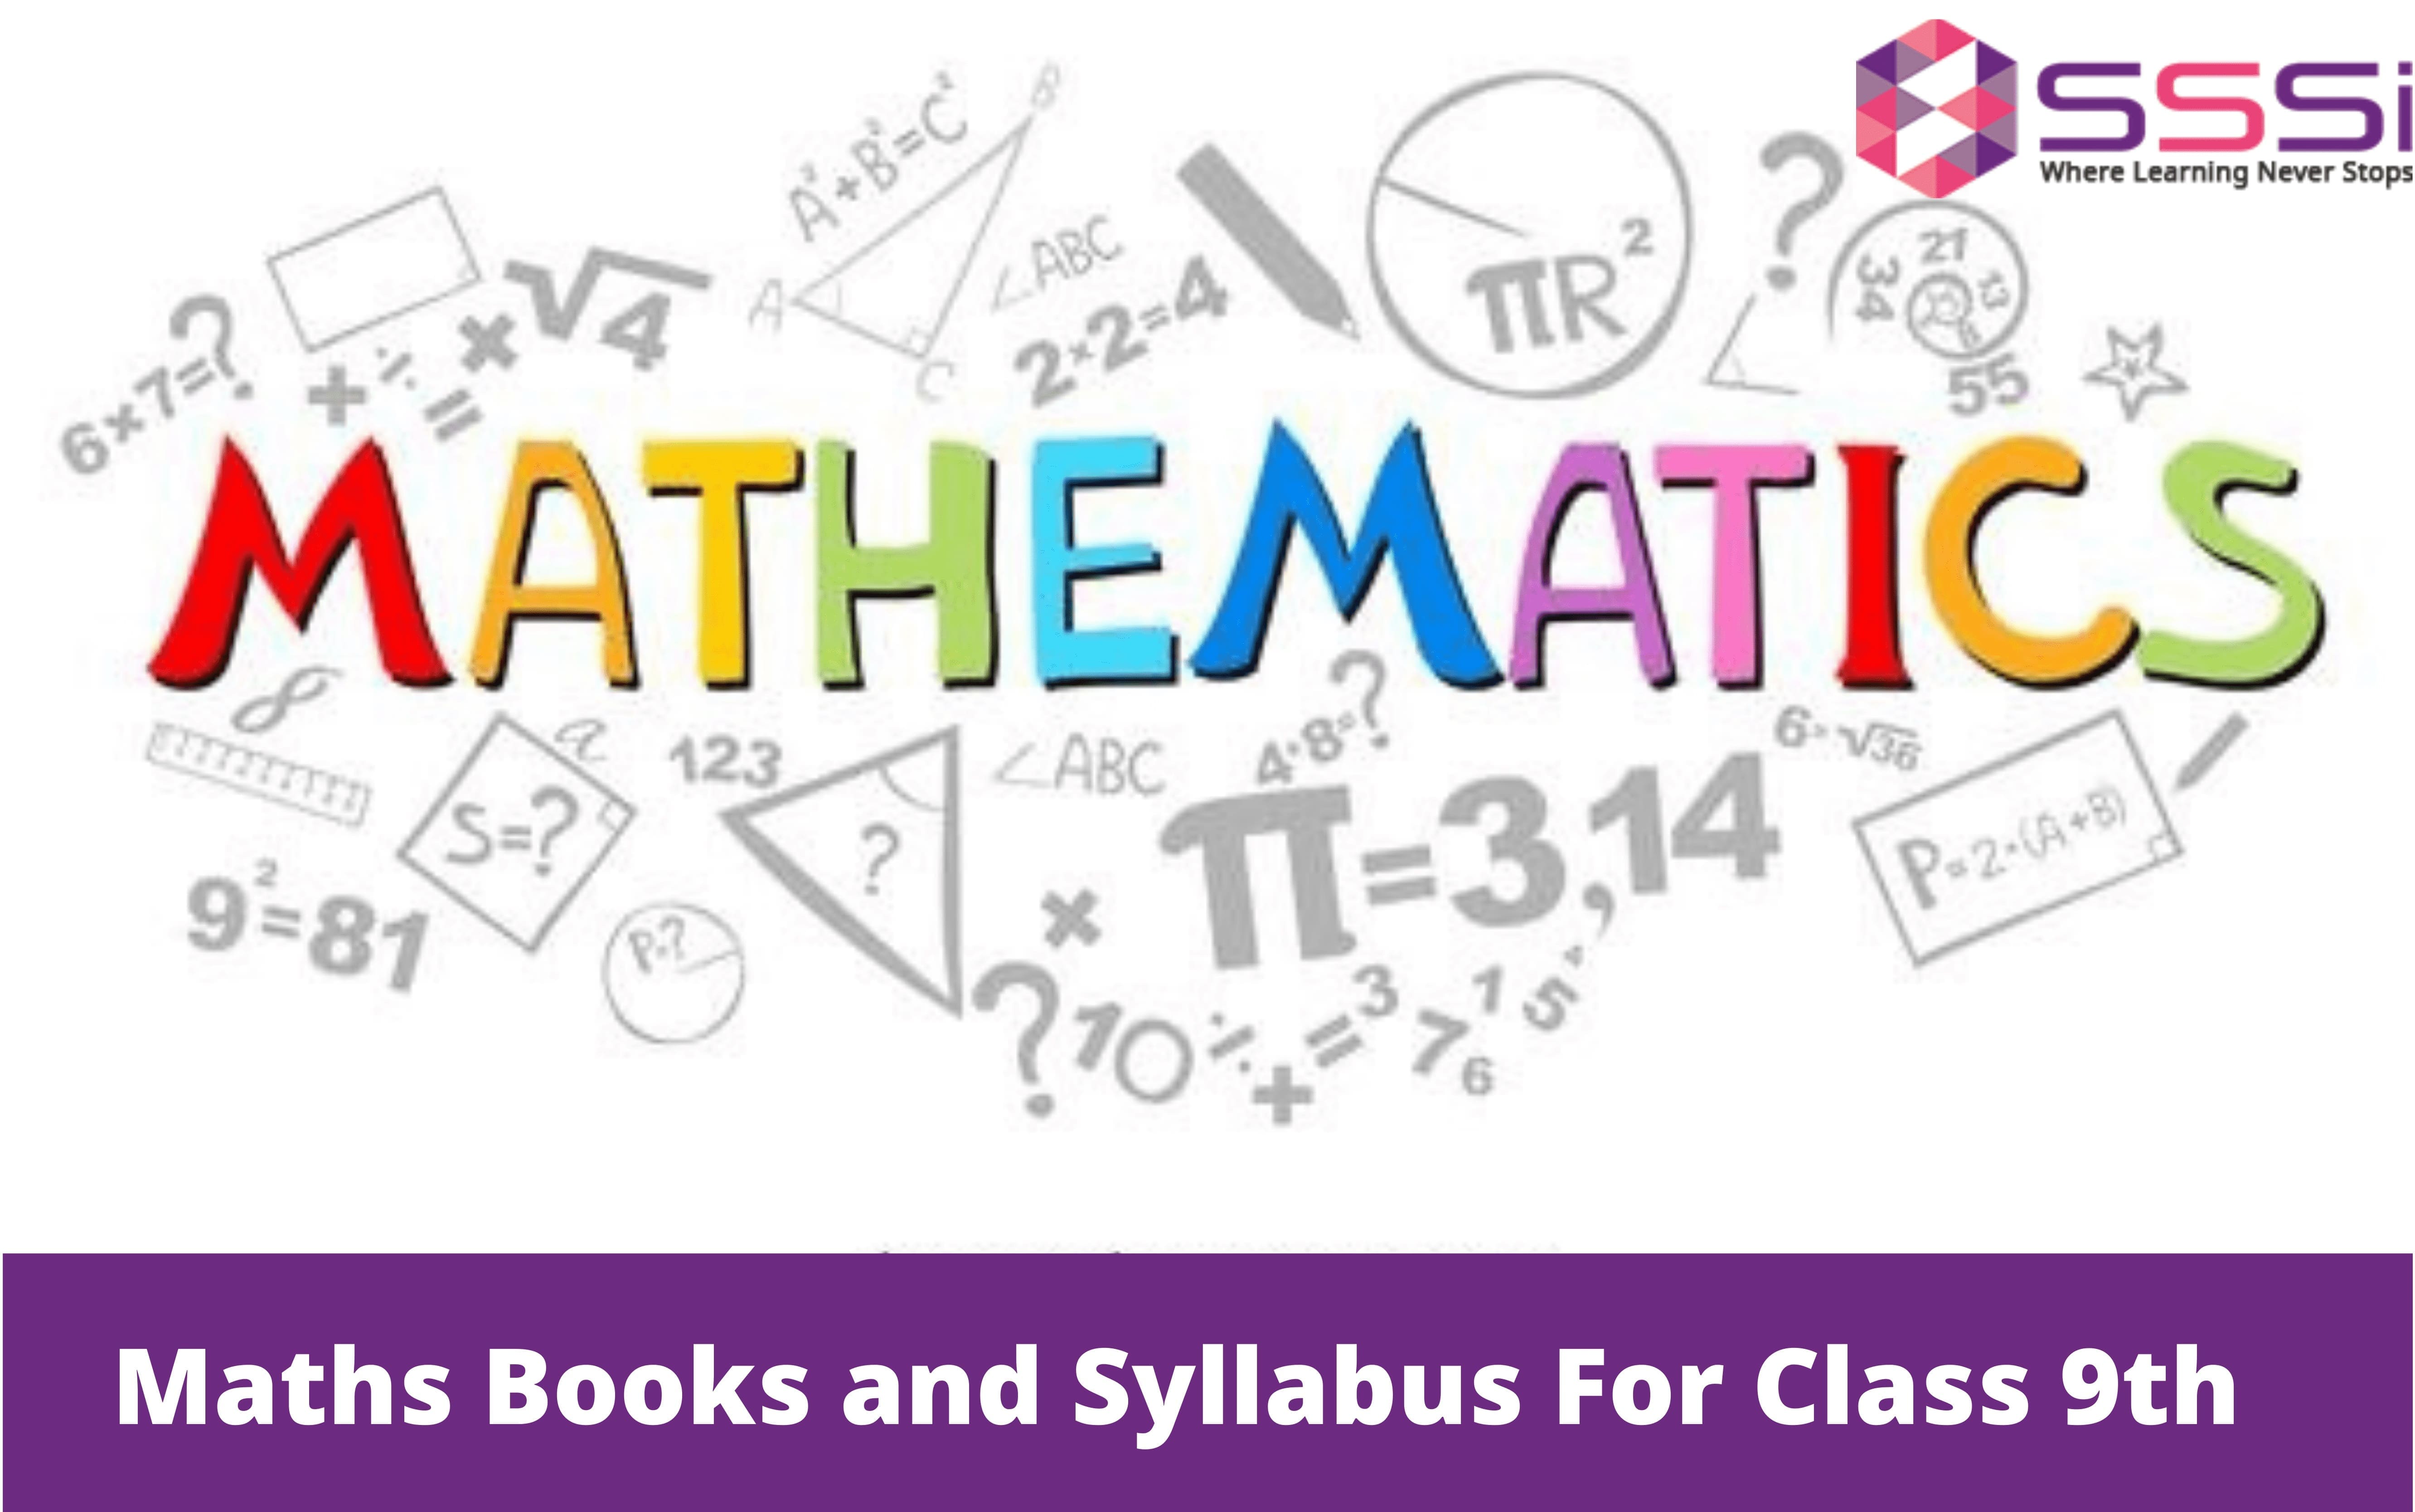 Best Reference Maths Books and Syllabus For Class 9th Students in India 